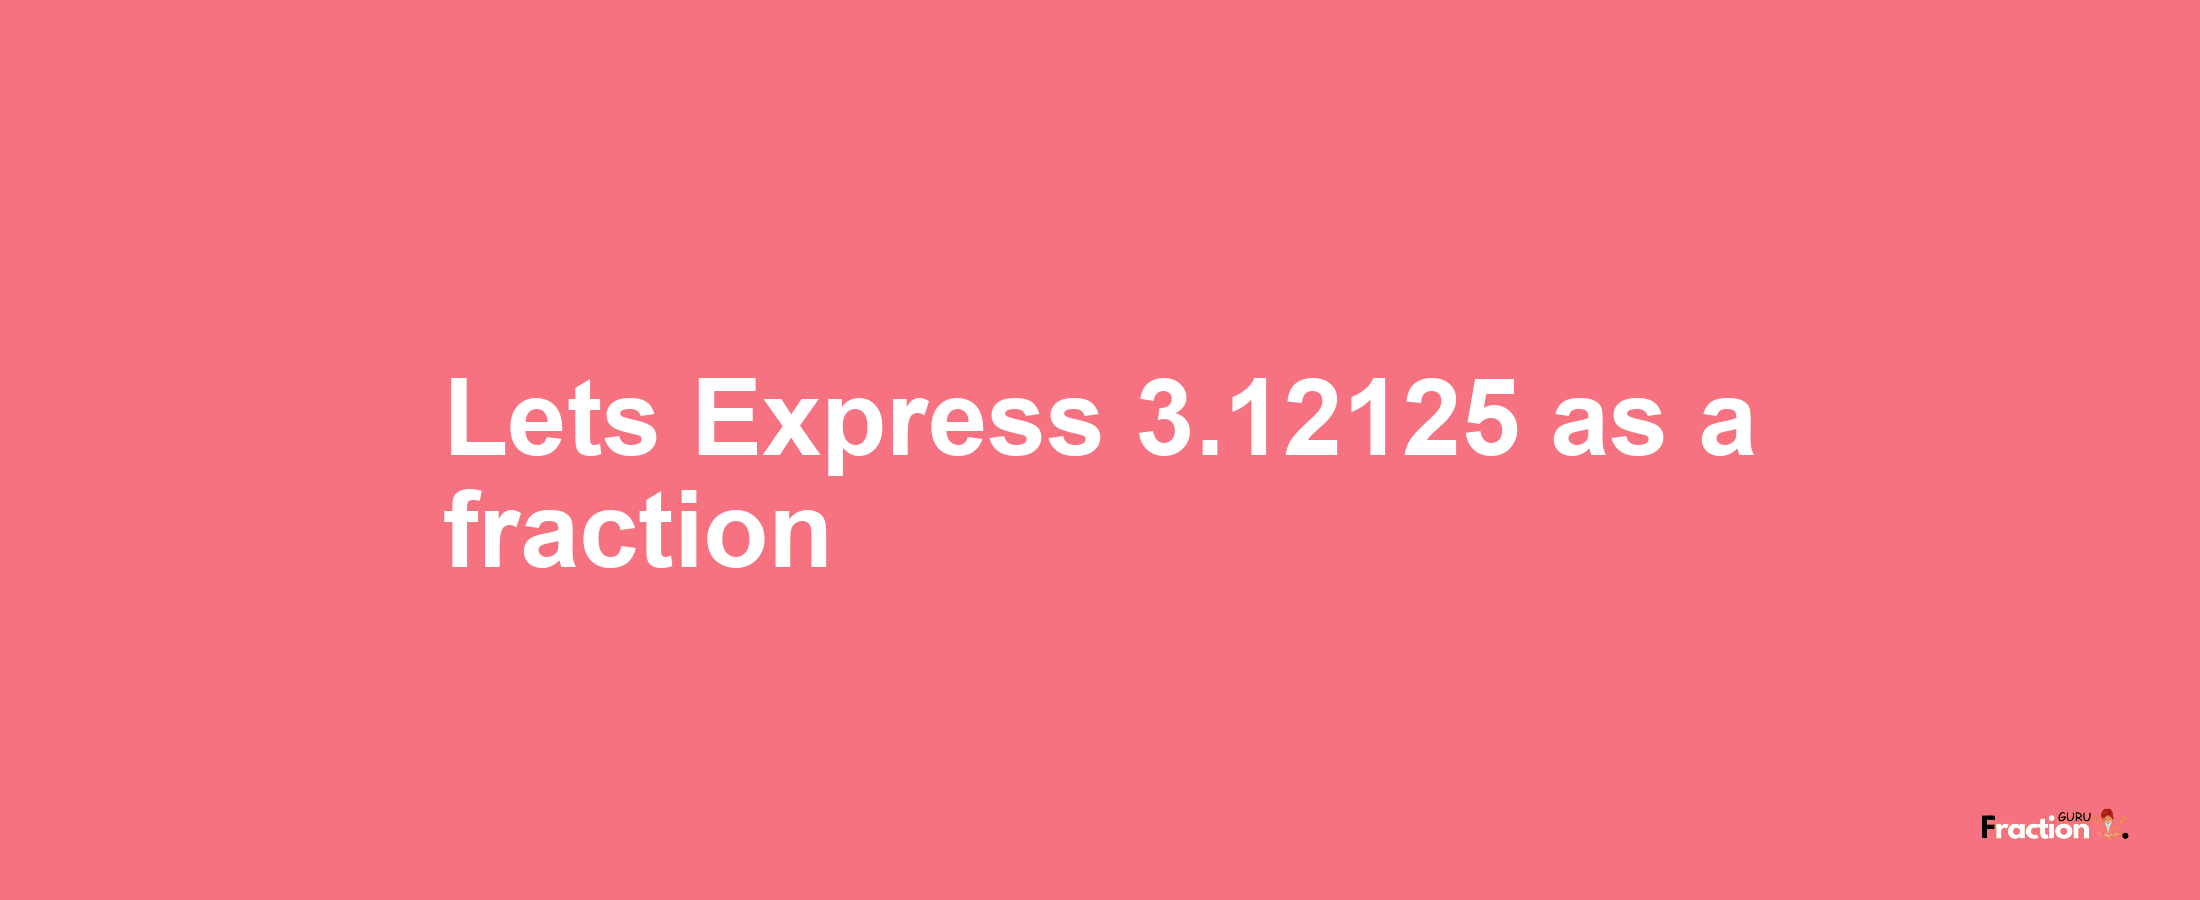 Lets Express 3.12125 as afraction